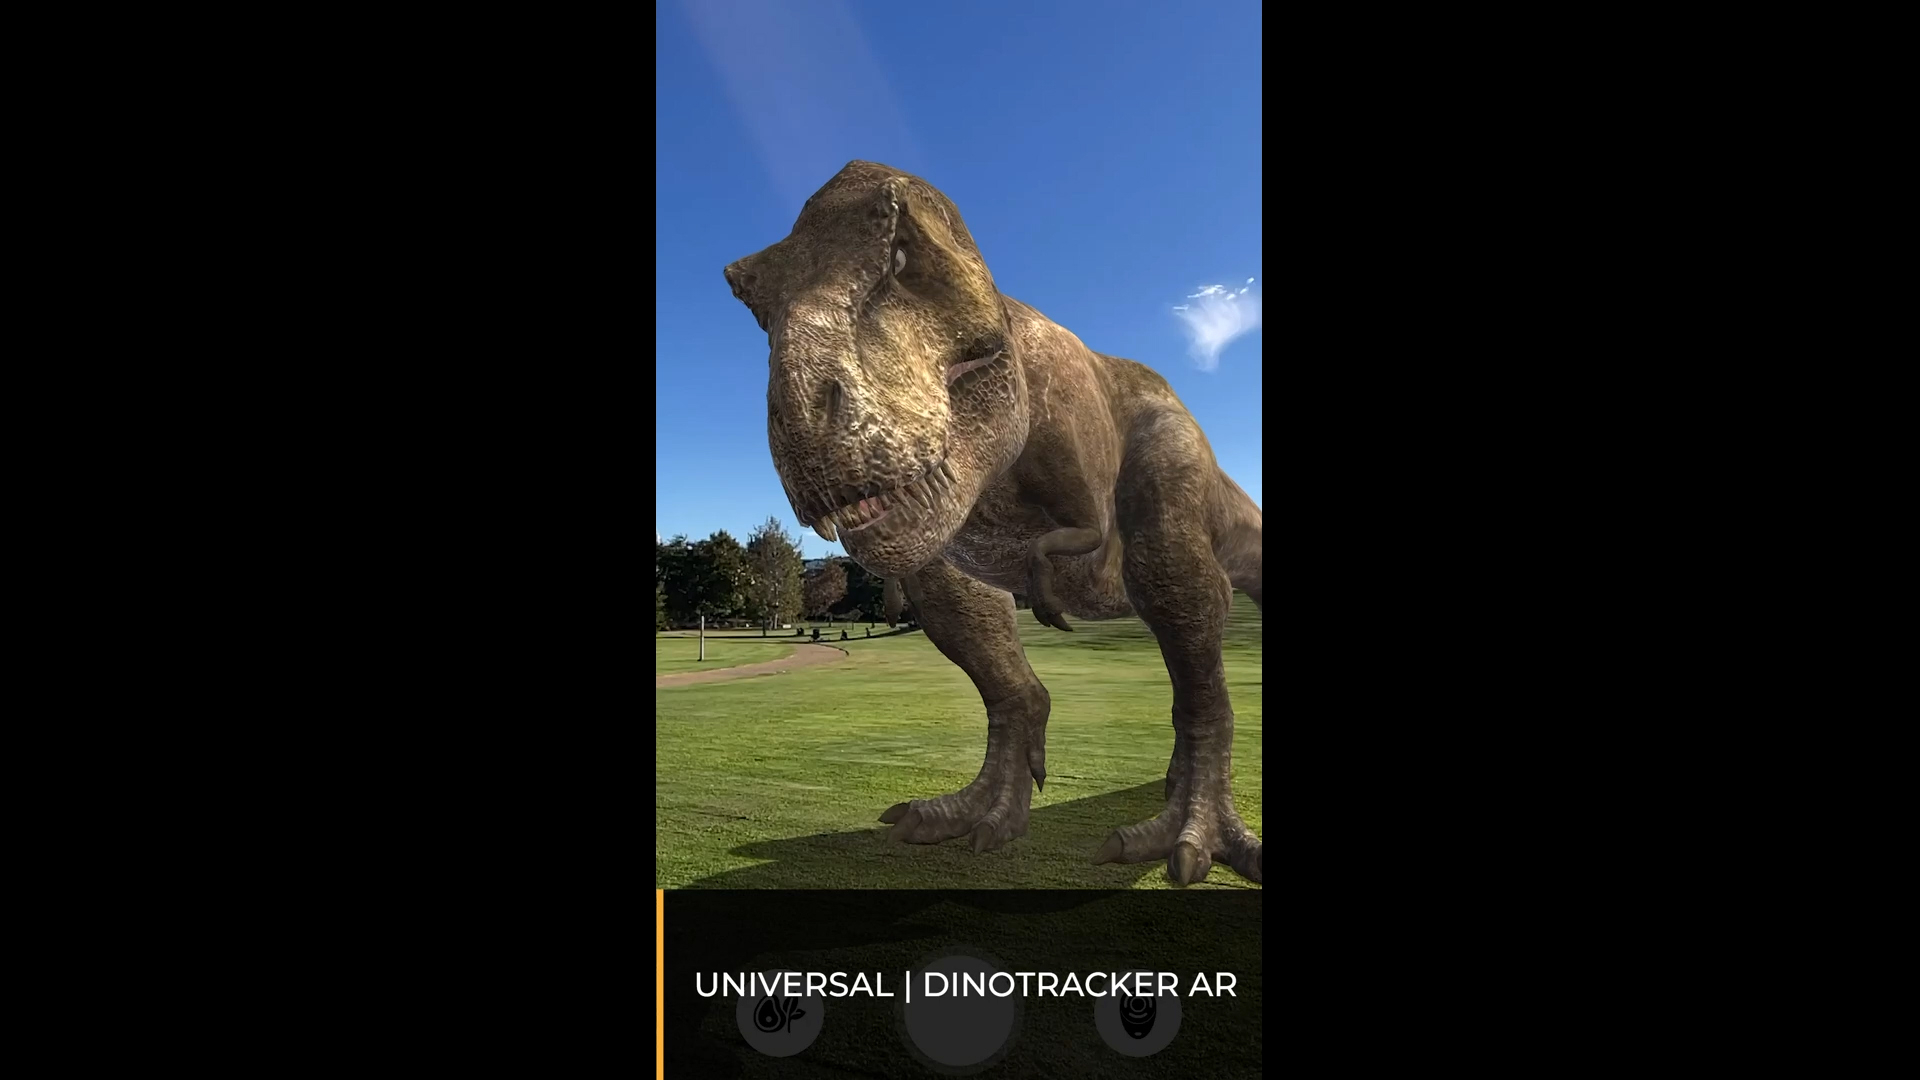 Introducing the Dinotracker AR mobile app, the official companion app to the global box-office blockbuster Jurassic World Dominion